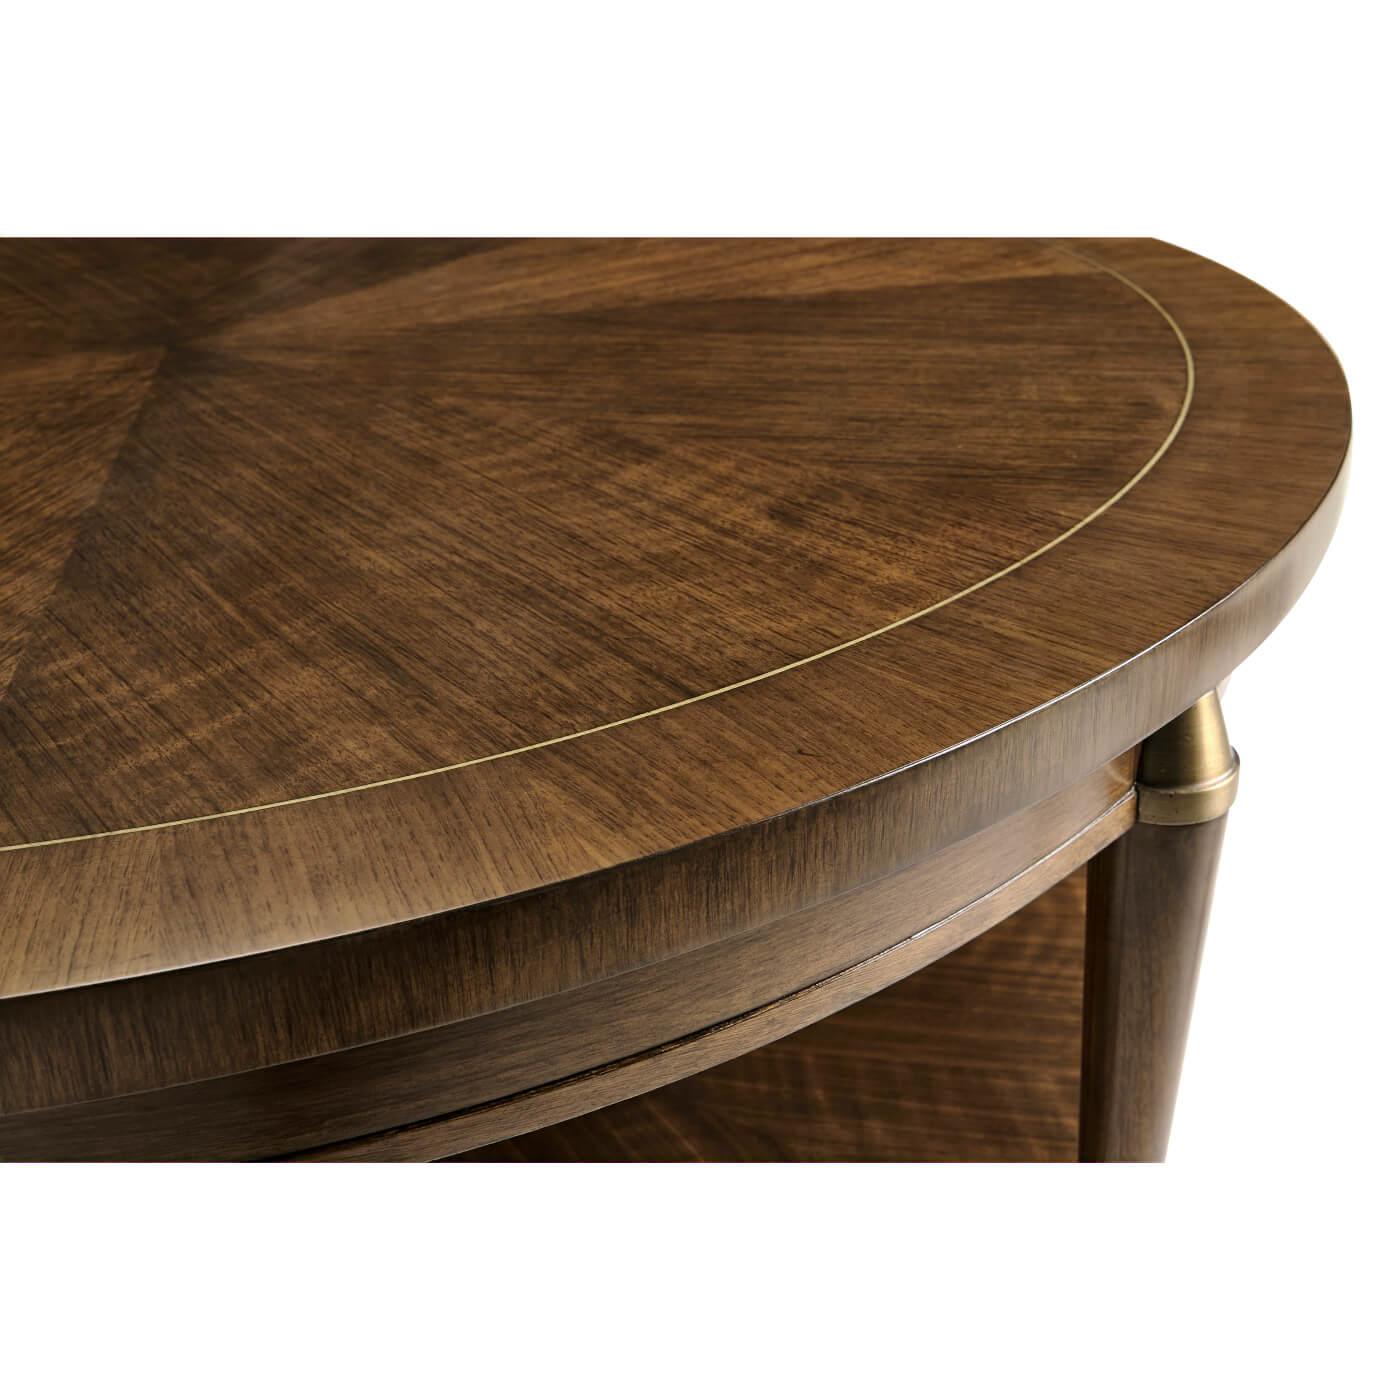 Vietnamese Midcentury Style Round Coffee Table For Sale